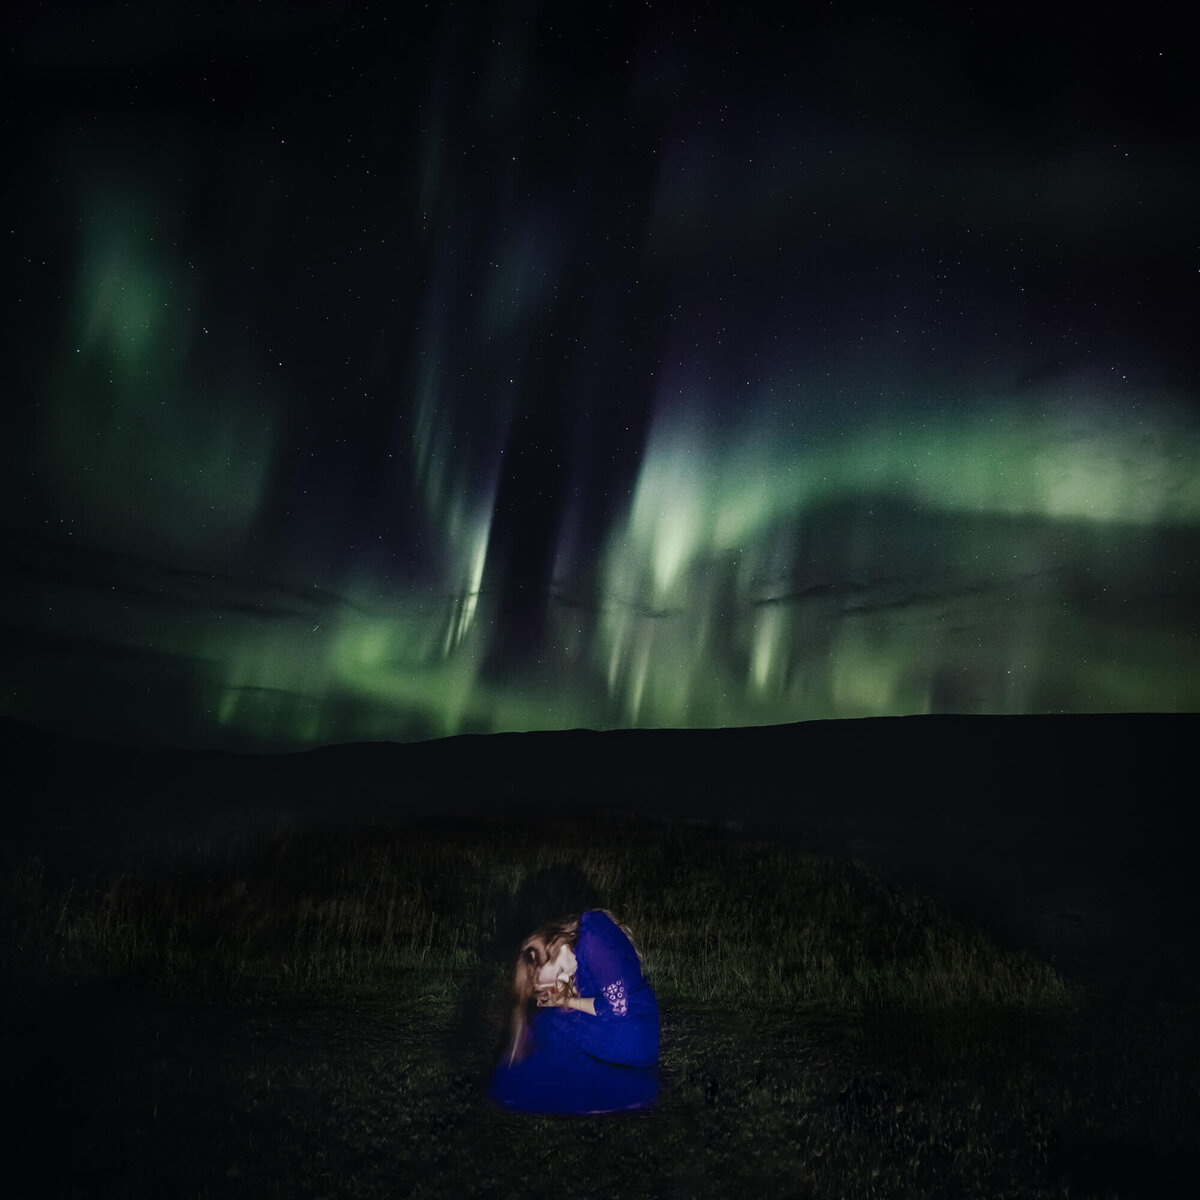 Aurora..-limited edition FinaArt prints and wall art from Selene Adores